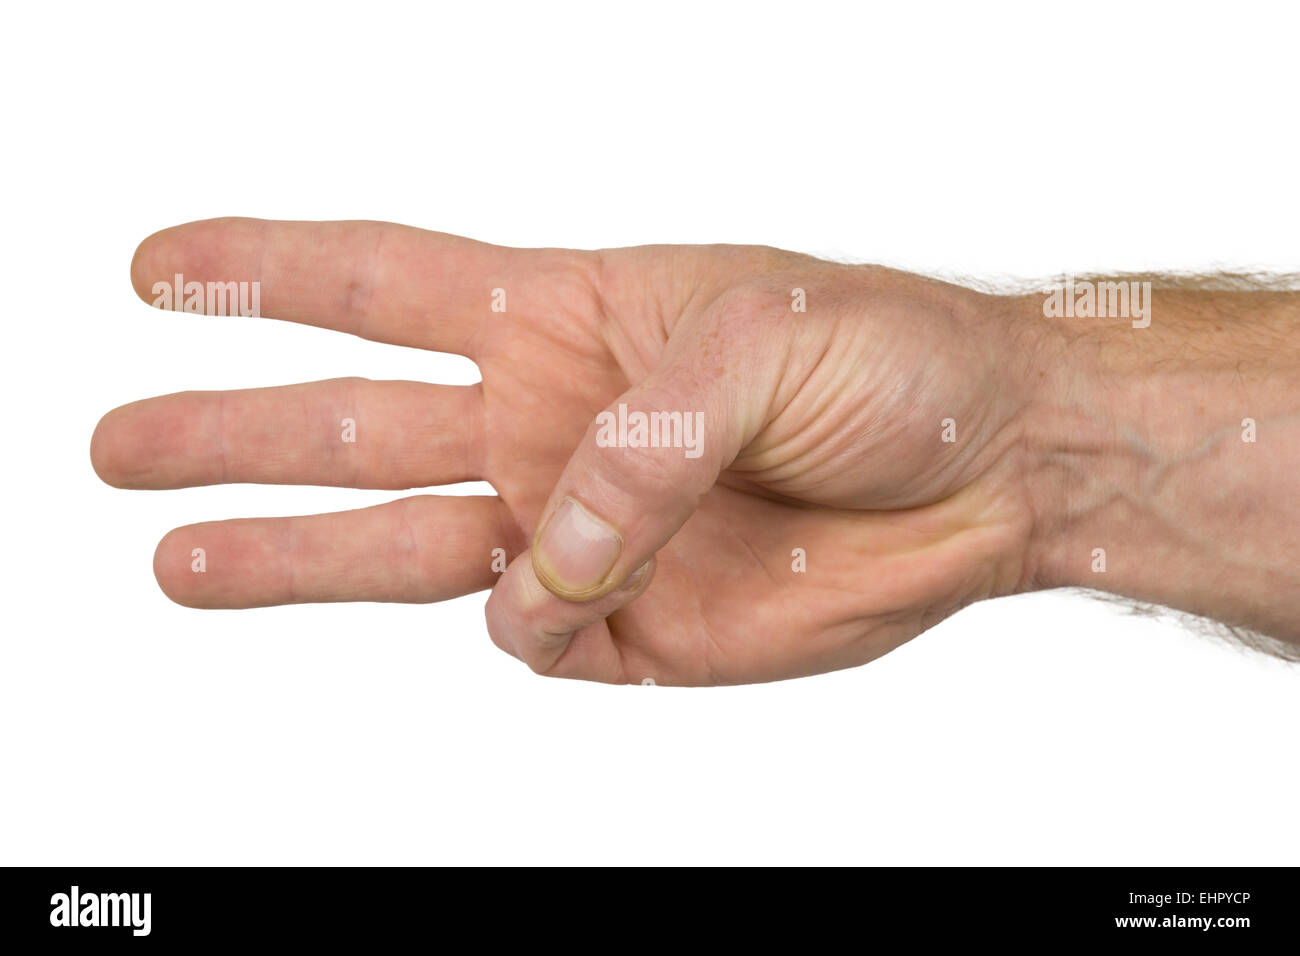 three fingers of a hand show a sign Stock Photo